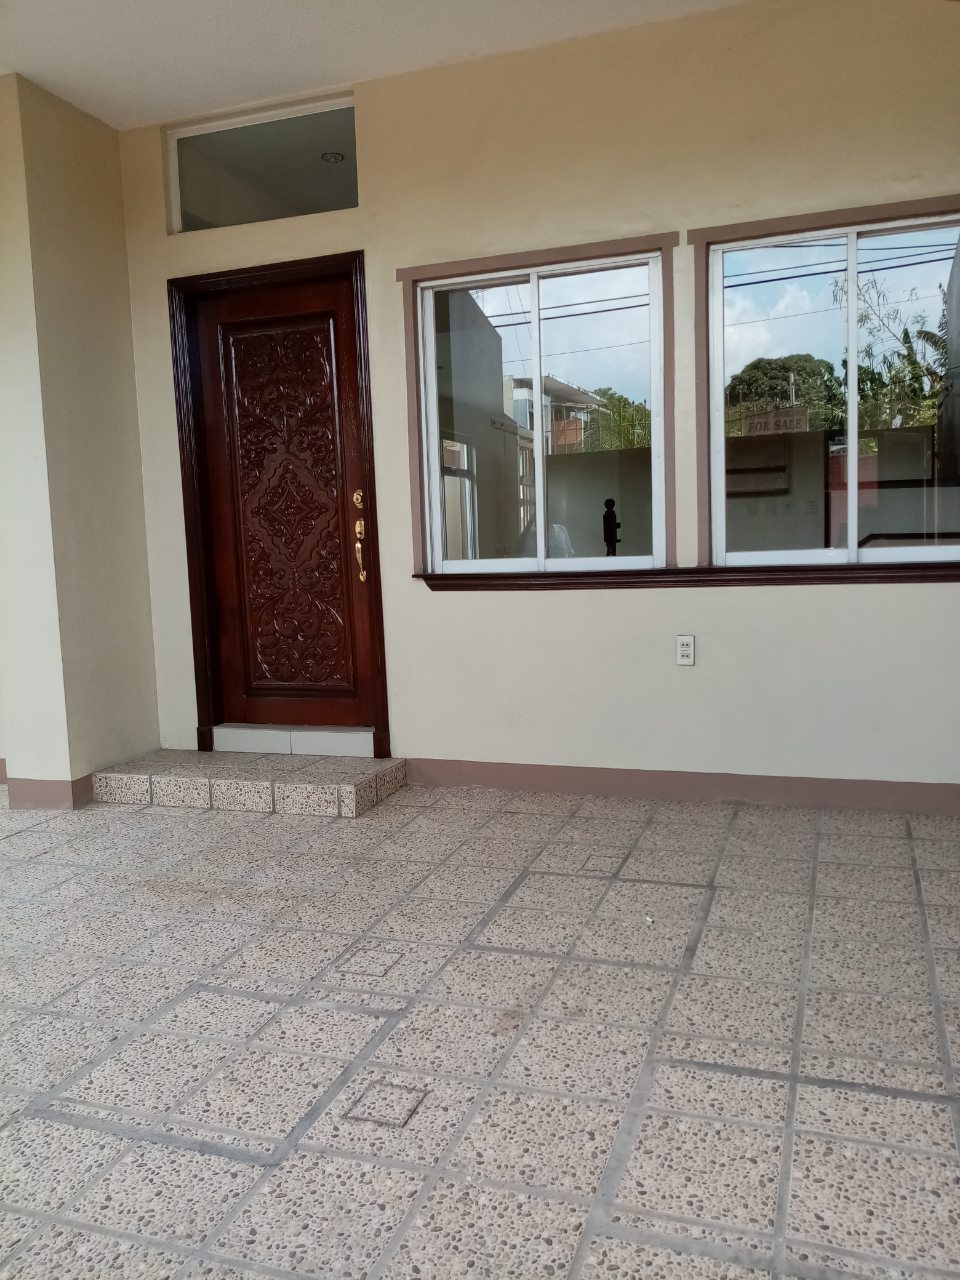 Bahay Toro Quezon city 3Storey townhouse with 2 car garage for Sale JN